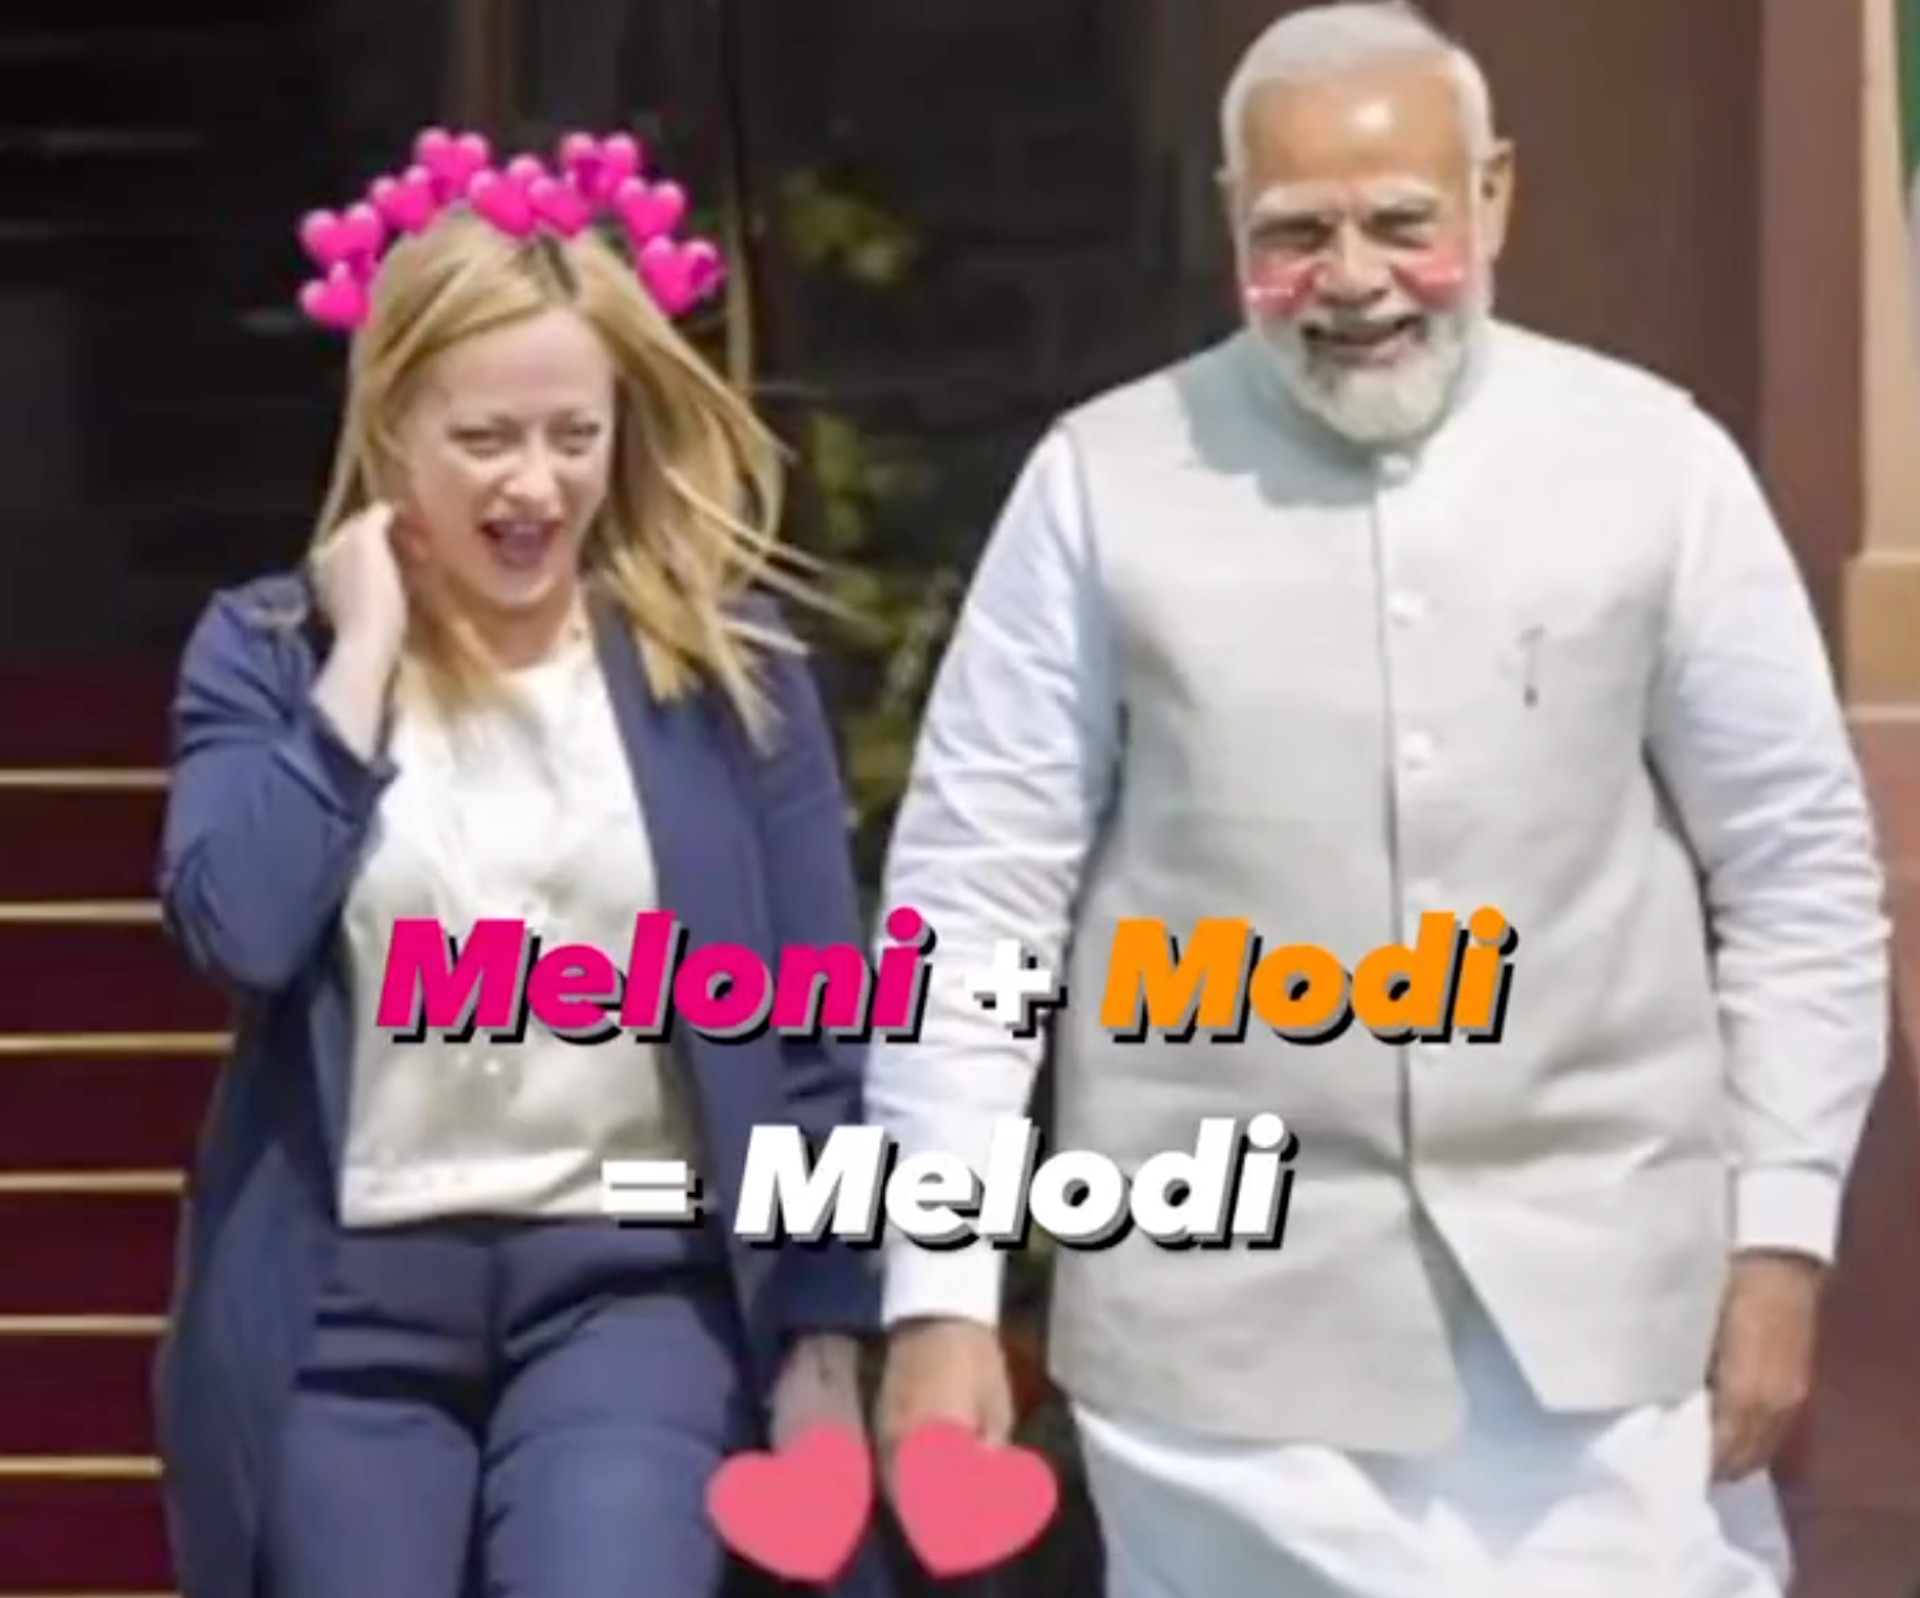 A meme of Meloni and Modi coupled together as Melodi